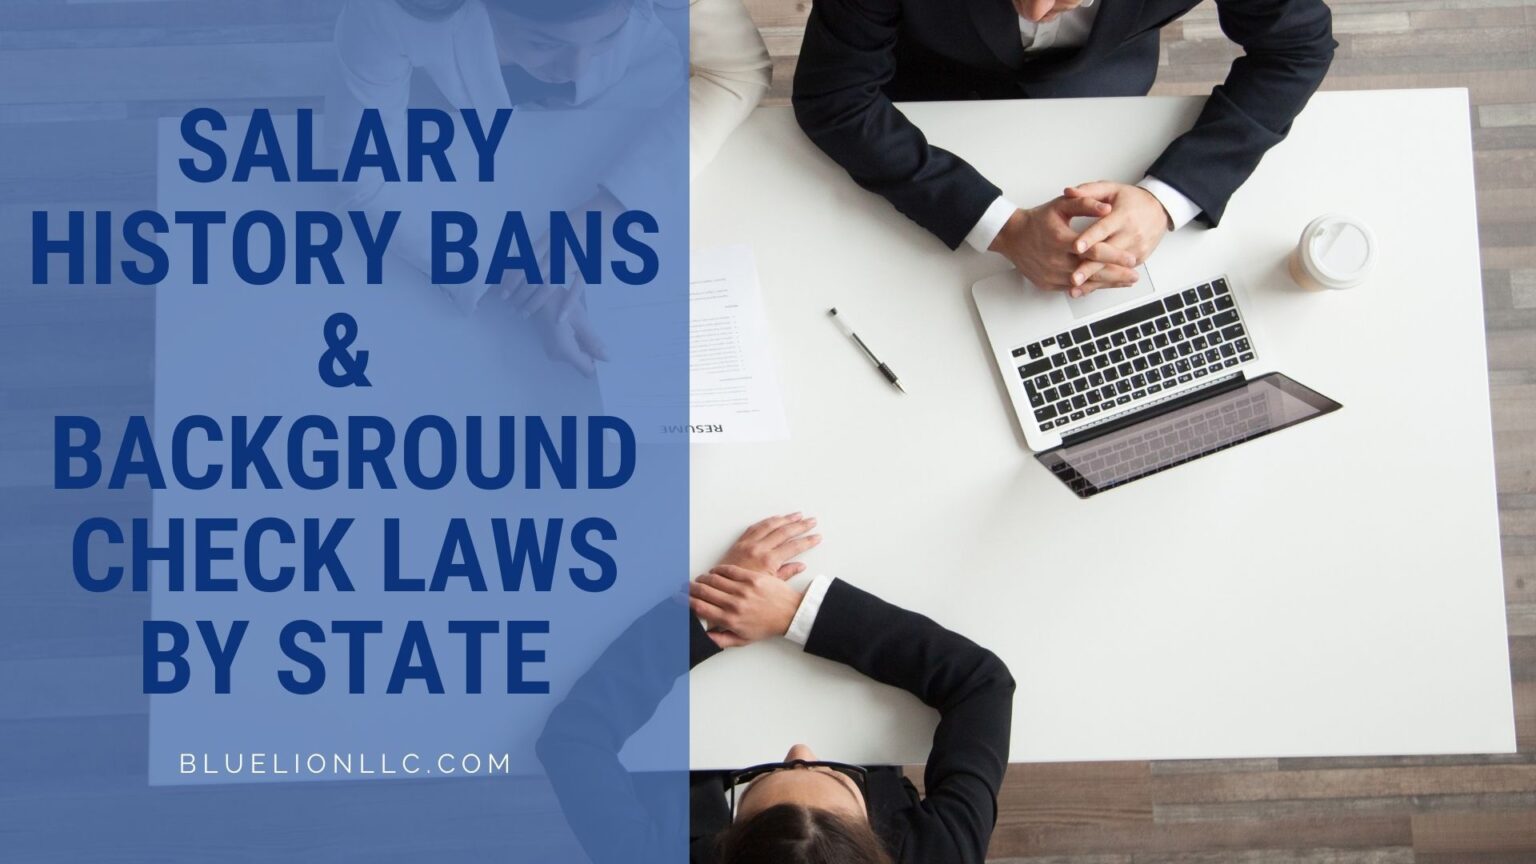 Salary History Bans & Background Check Laws by State Blue Lion